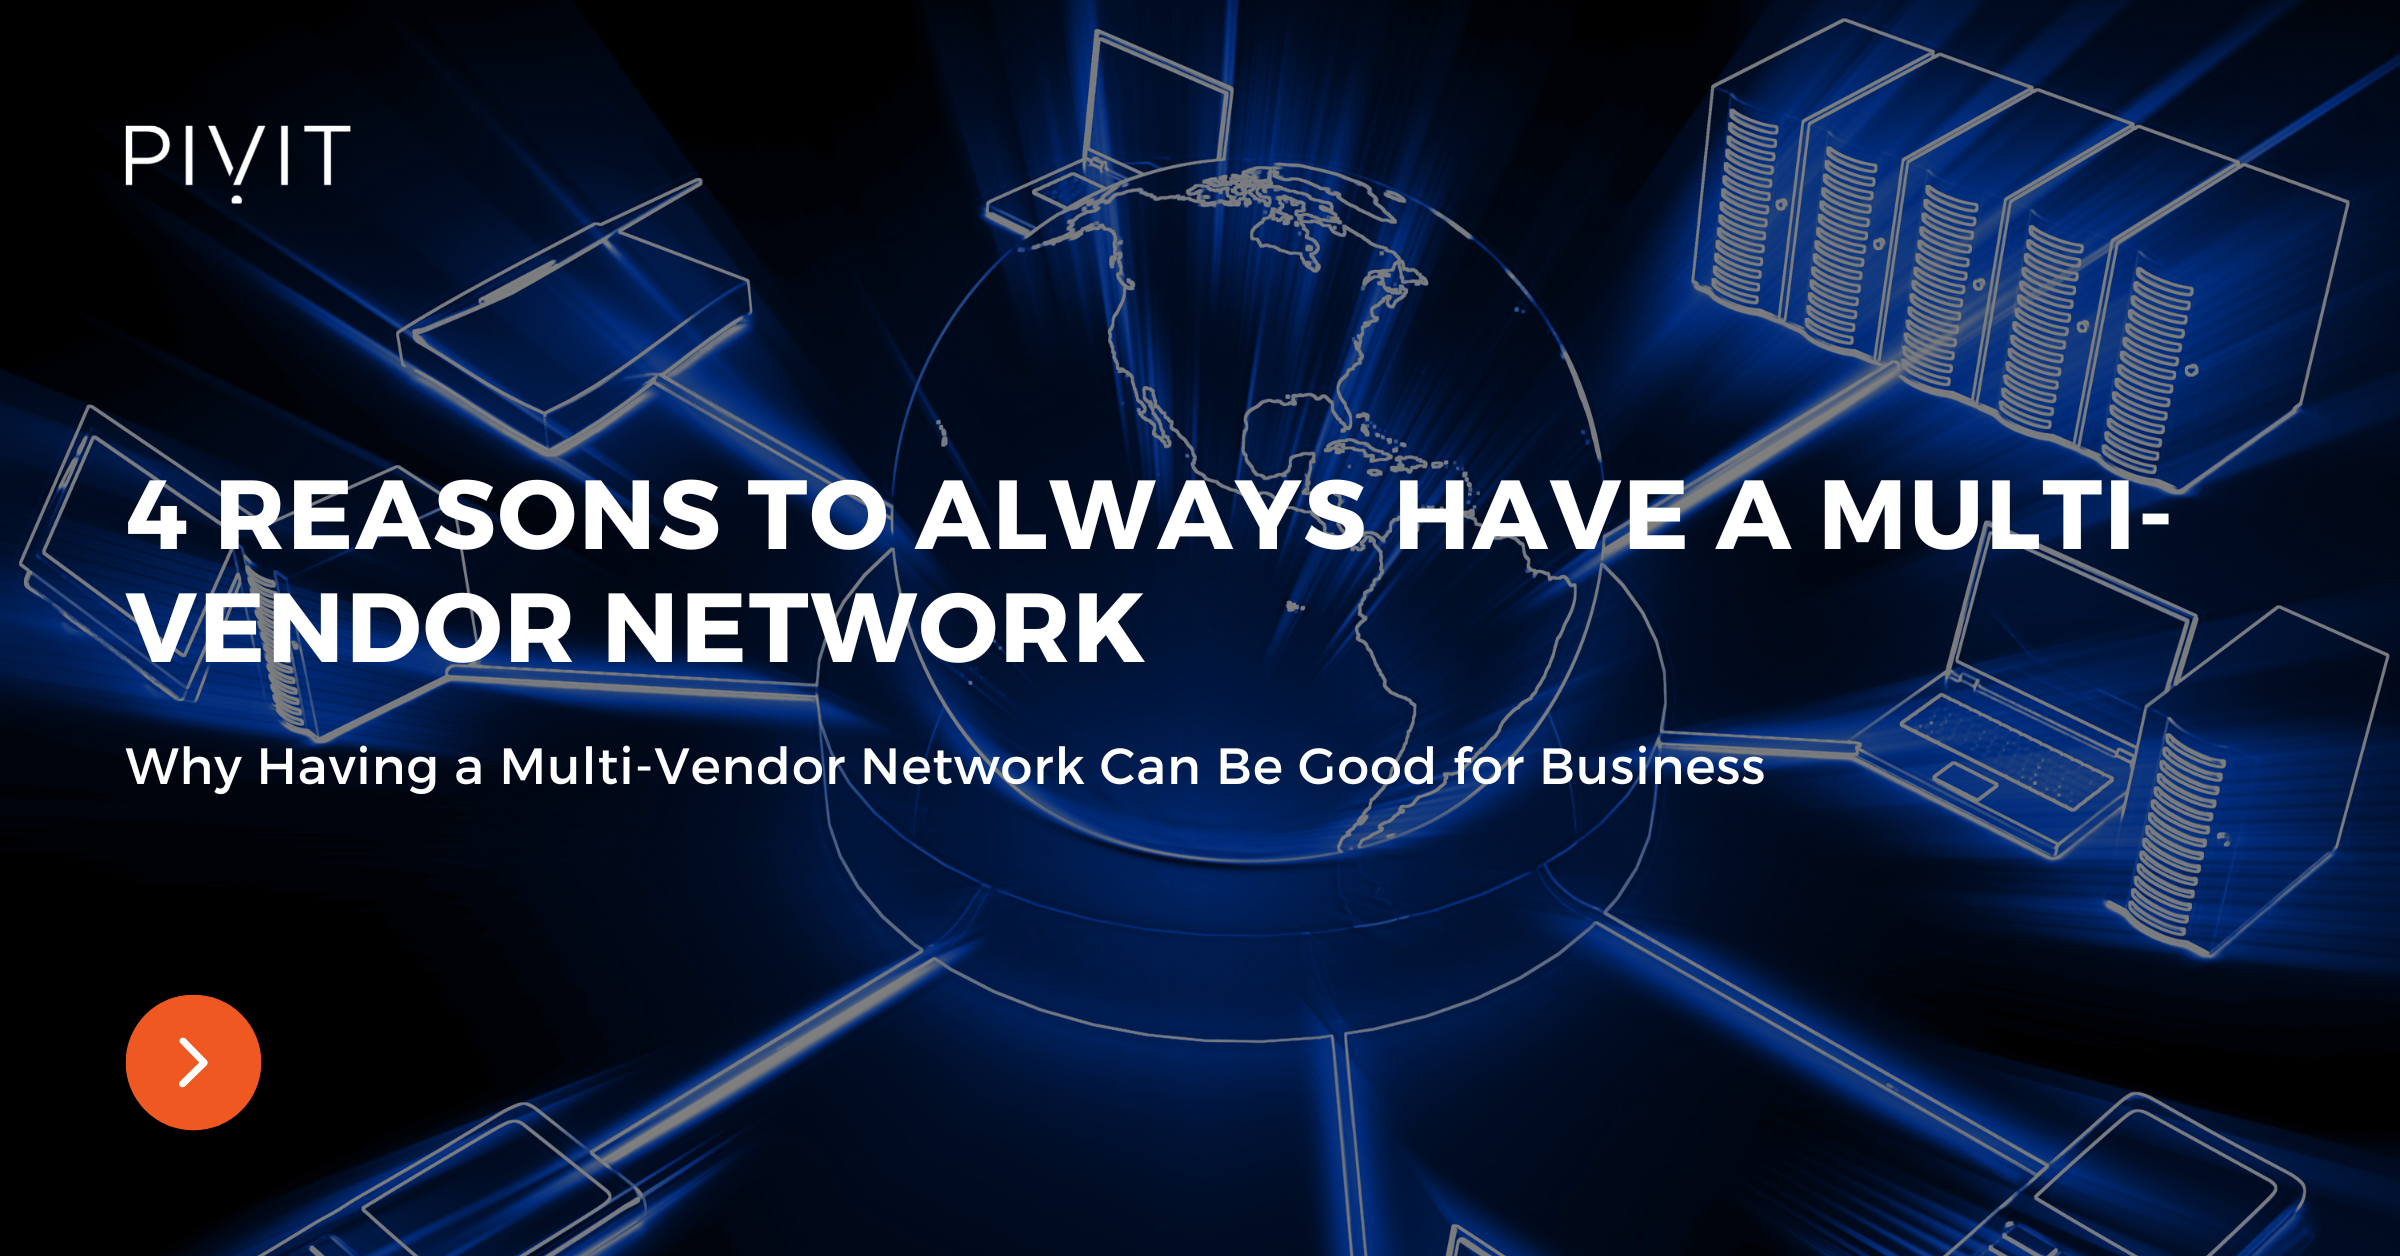 4 Reasons to Always Have a Multi-Vendor Network